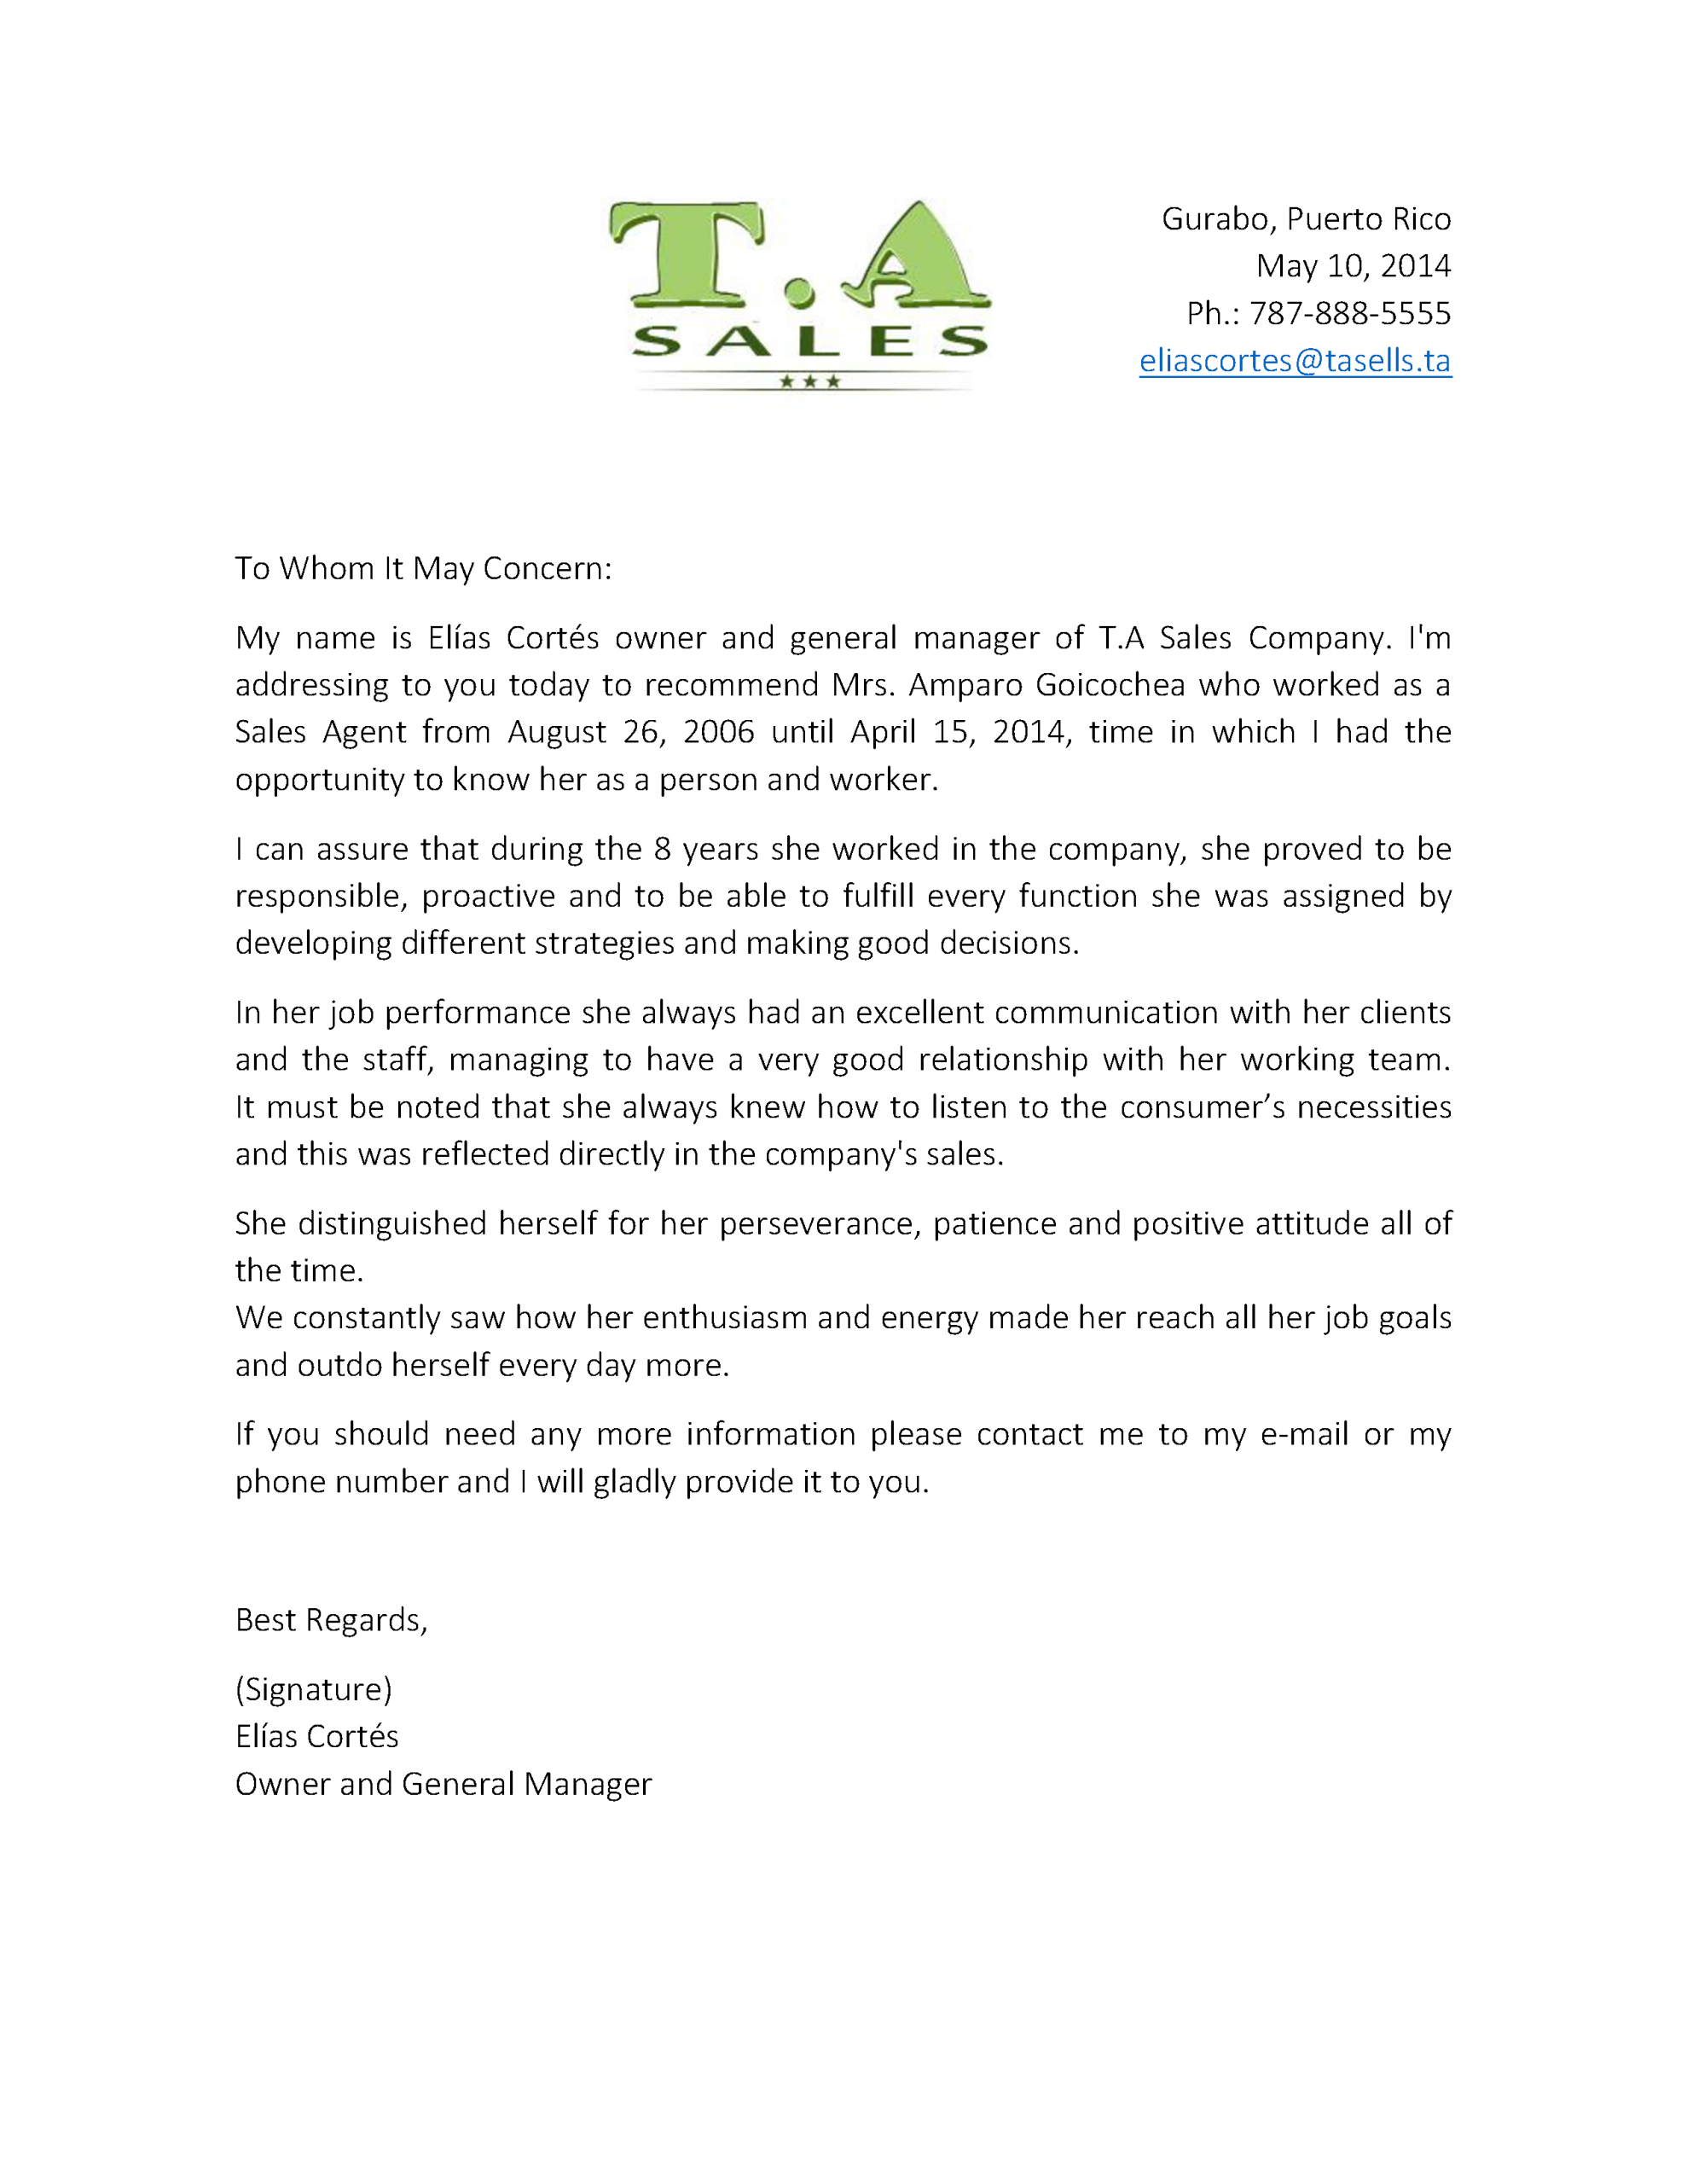 Sales Agent Sample Of Recommendation Letter Job 2 Grow with dimensions 2550 X 3300